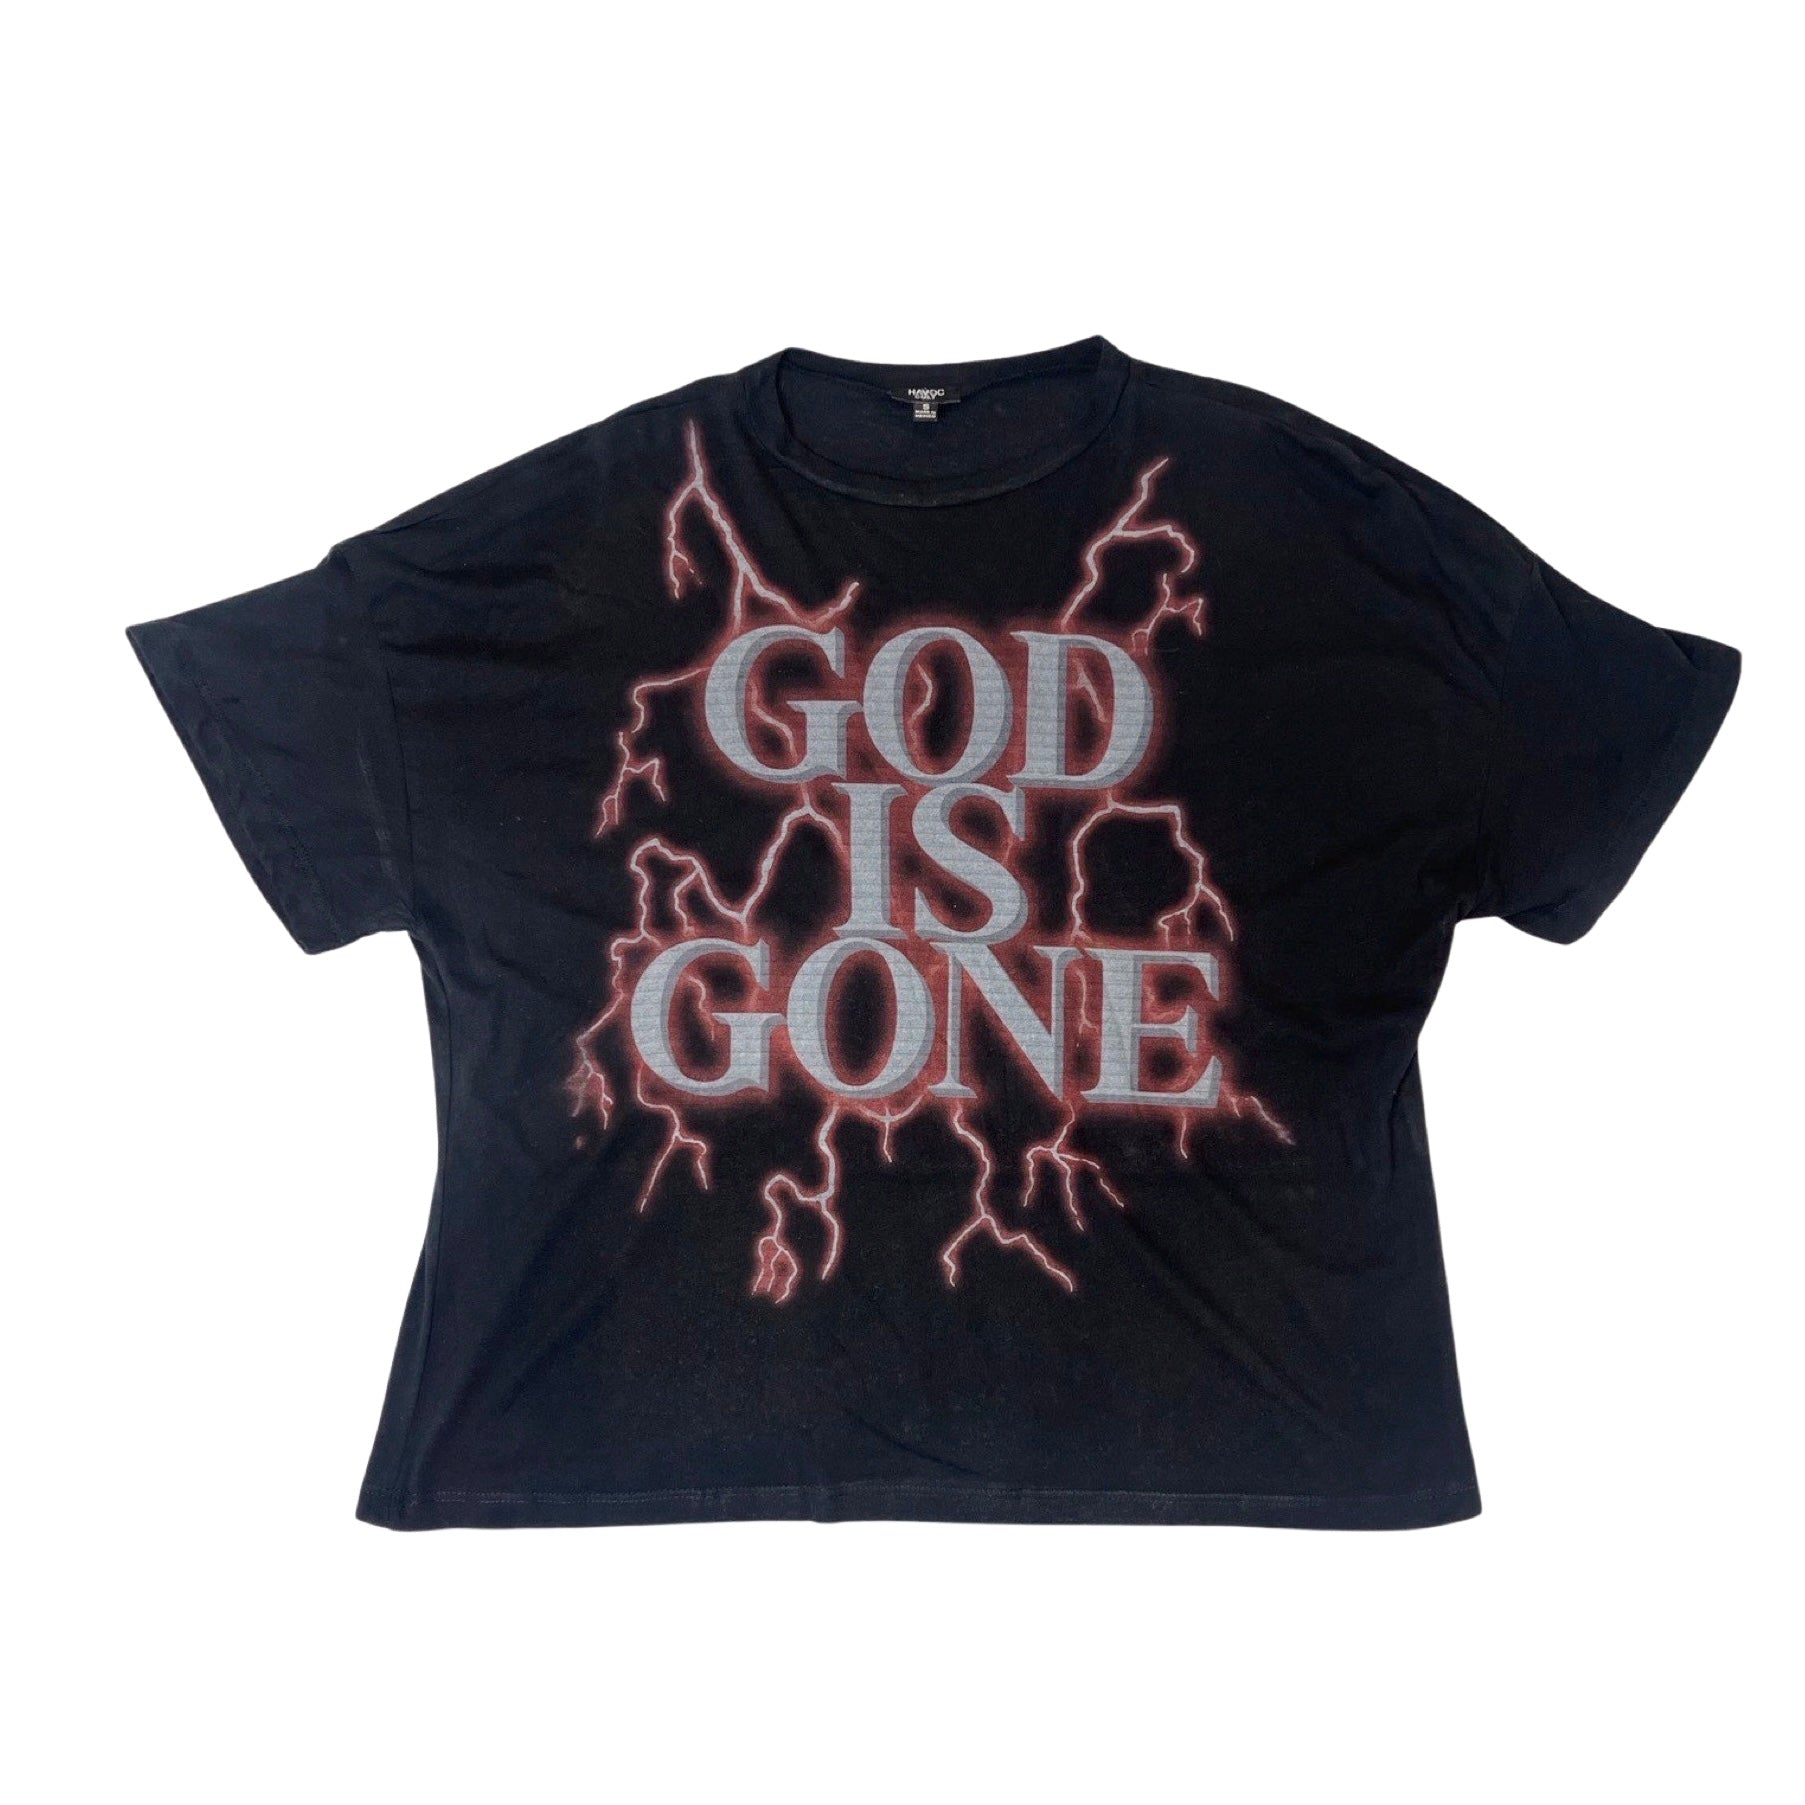 GOD IS GONE TEE